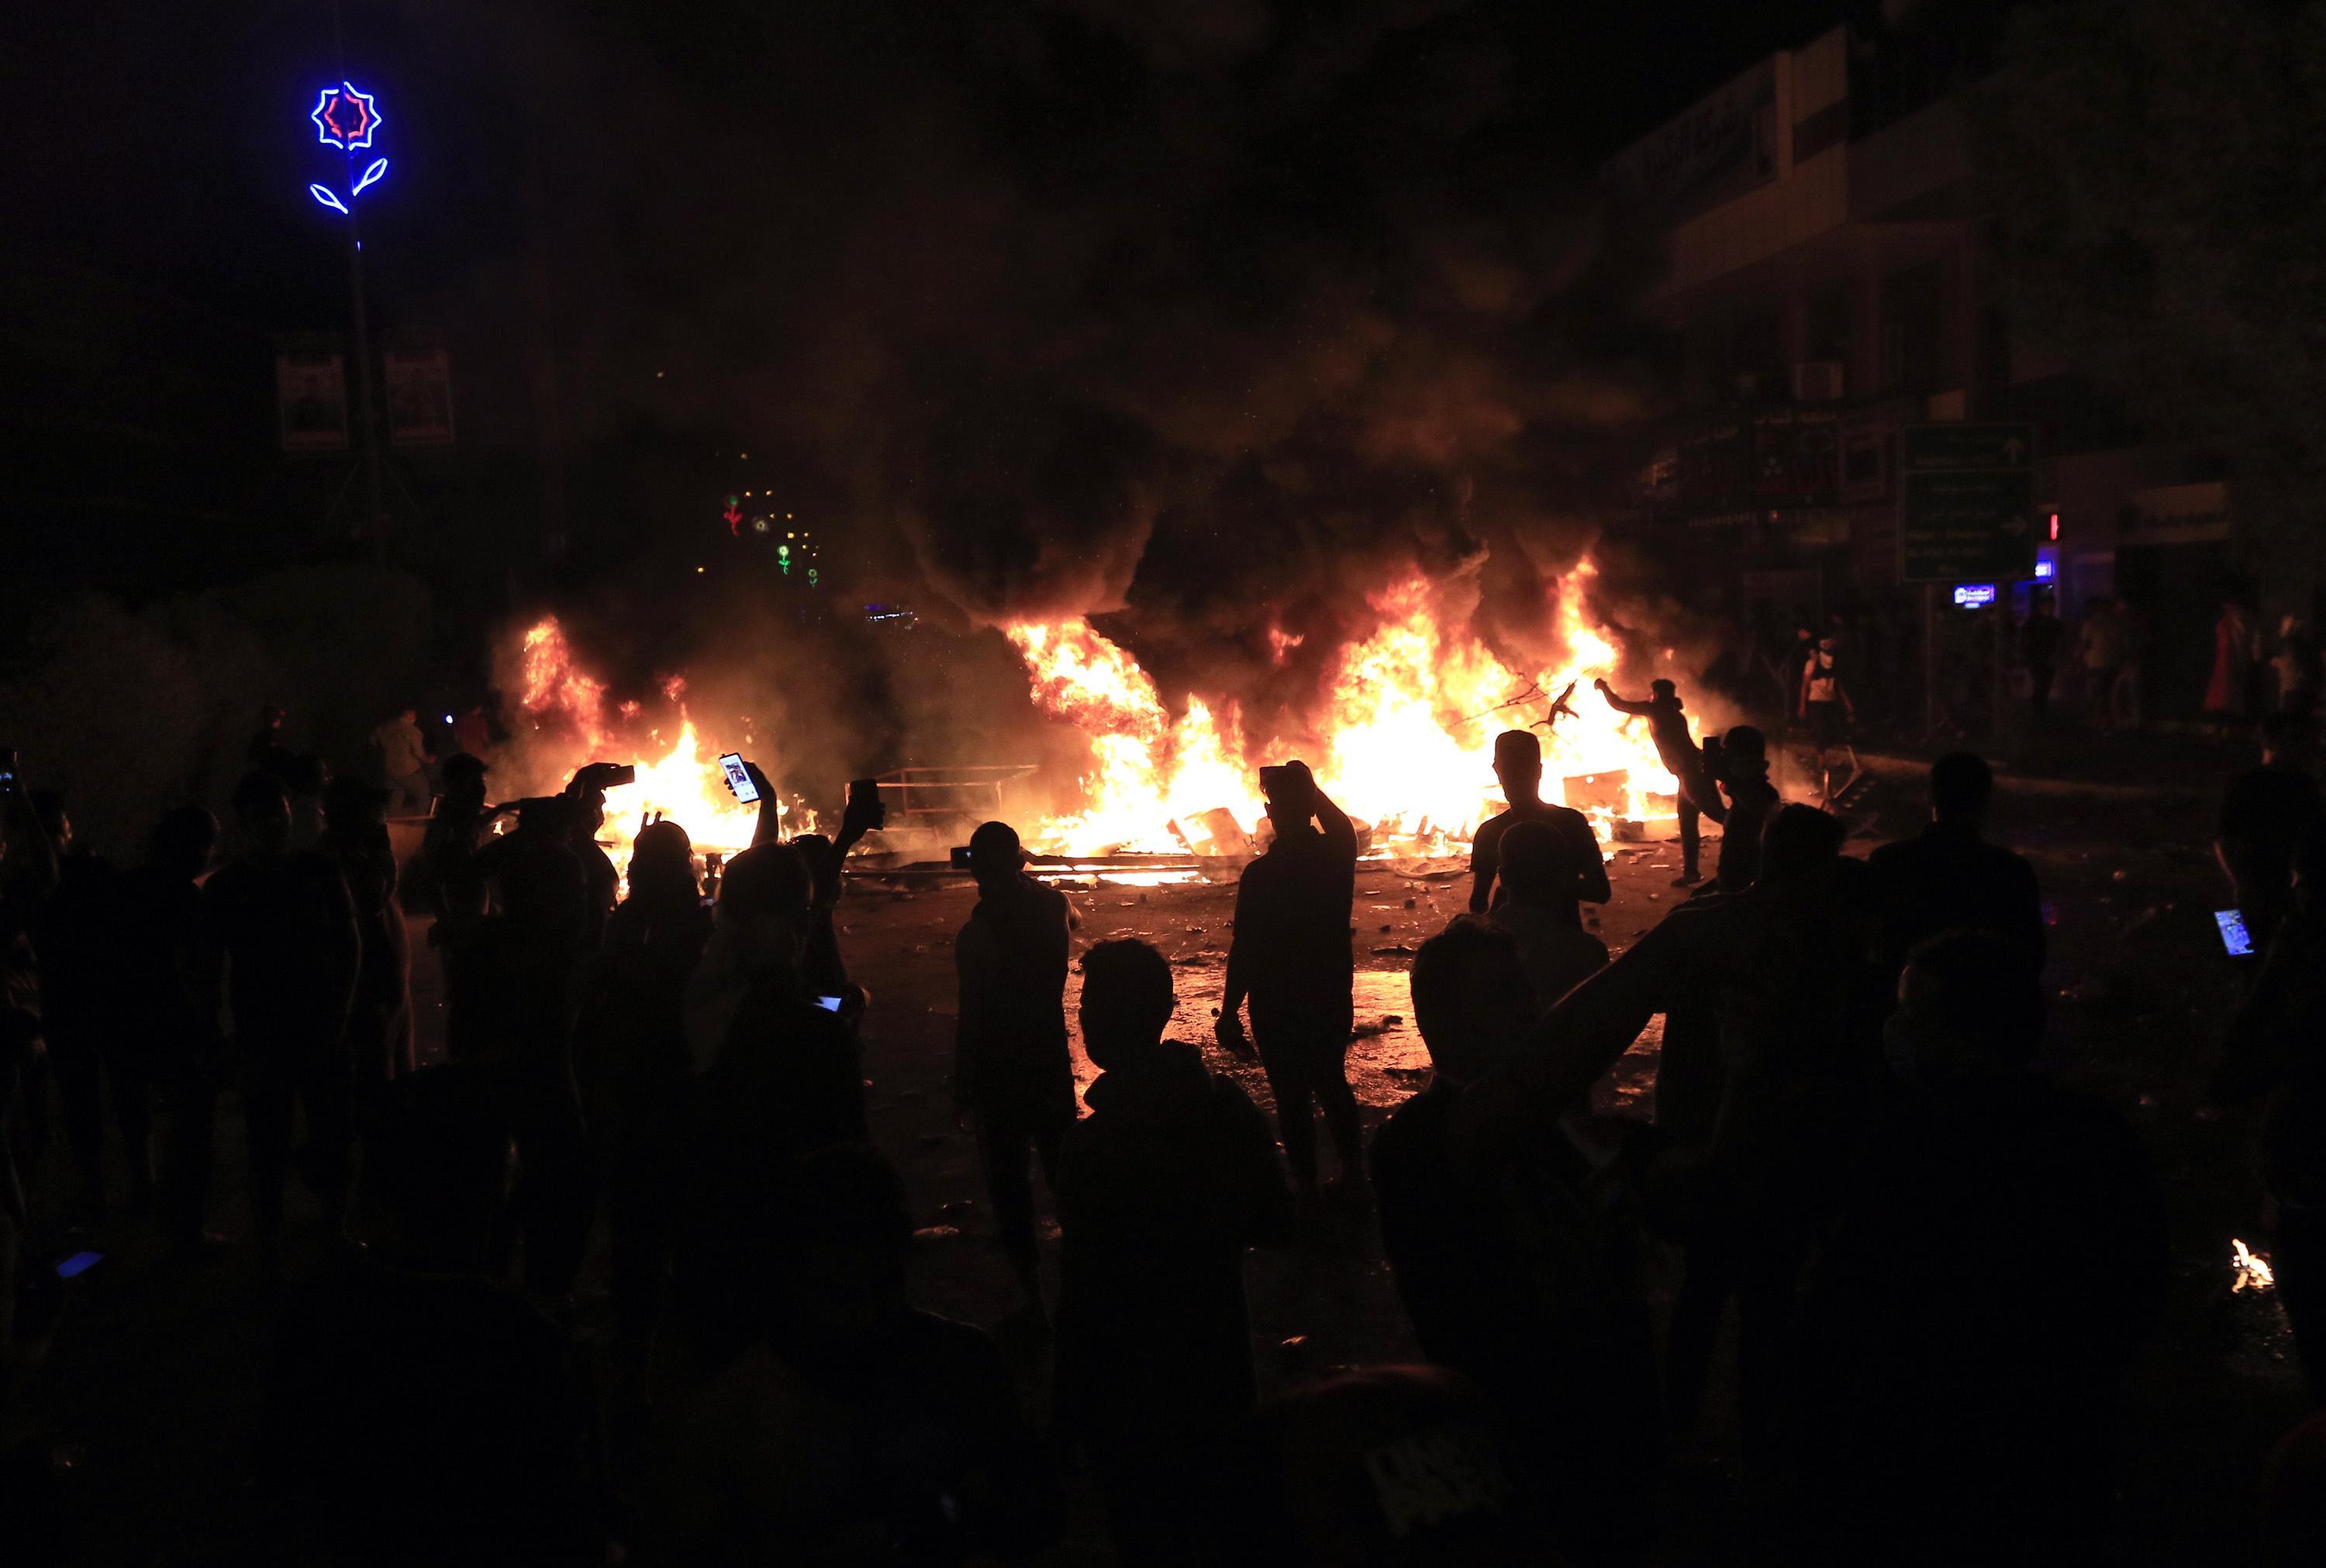 epa07957545 Iraqi protesters burn tires during a protest in Karbala, southern Iraq, 28 October 2019 (issued on 29 October 2019). Medical sources state that at least 13 protesters were killed and dozens others were wounded when Iraqi security forces attacked the site of protests in Karbala city southern Iraq on 28 October.  EPA/FURQAN AL-AARAJI